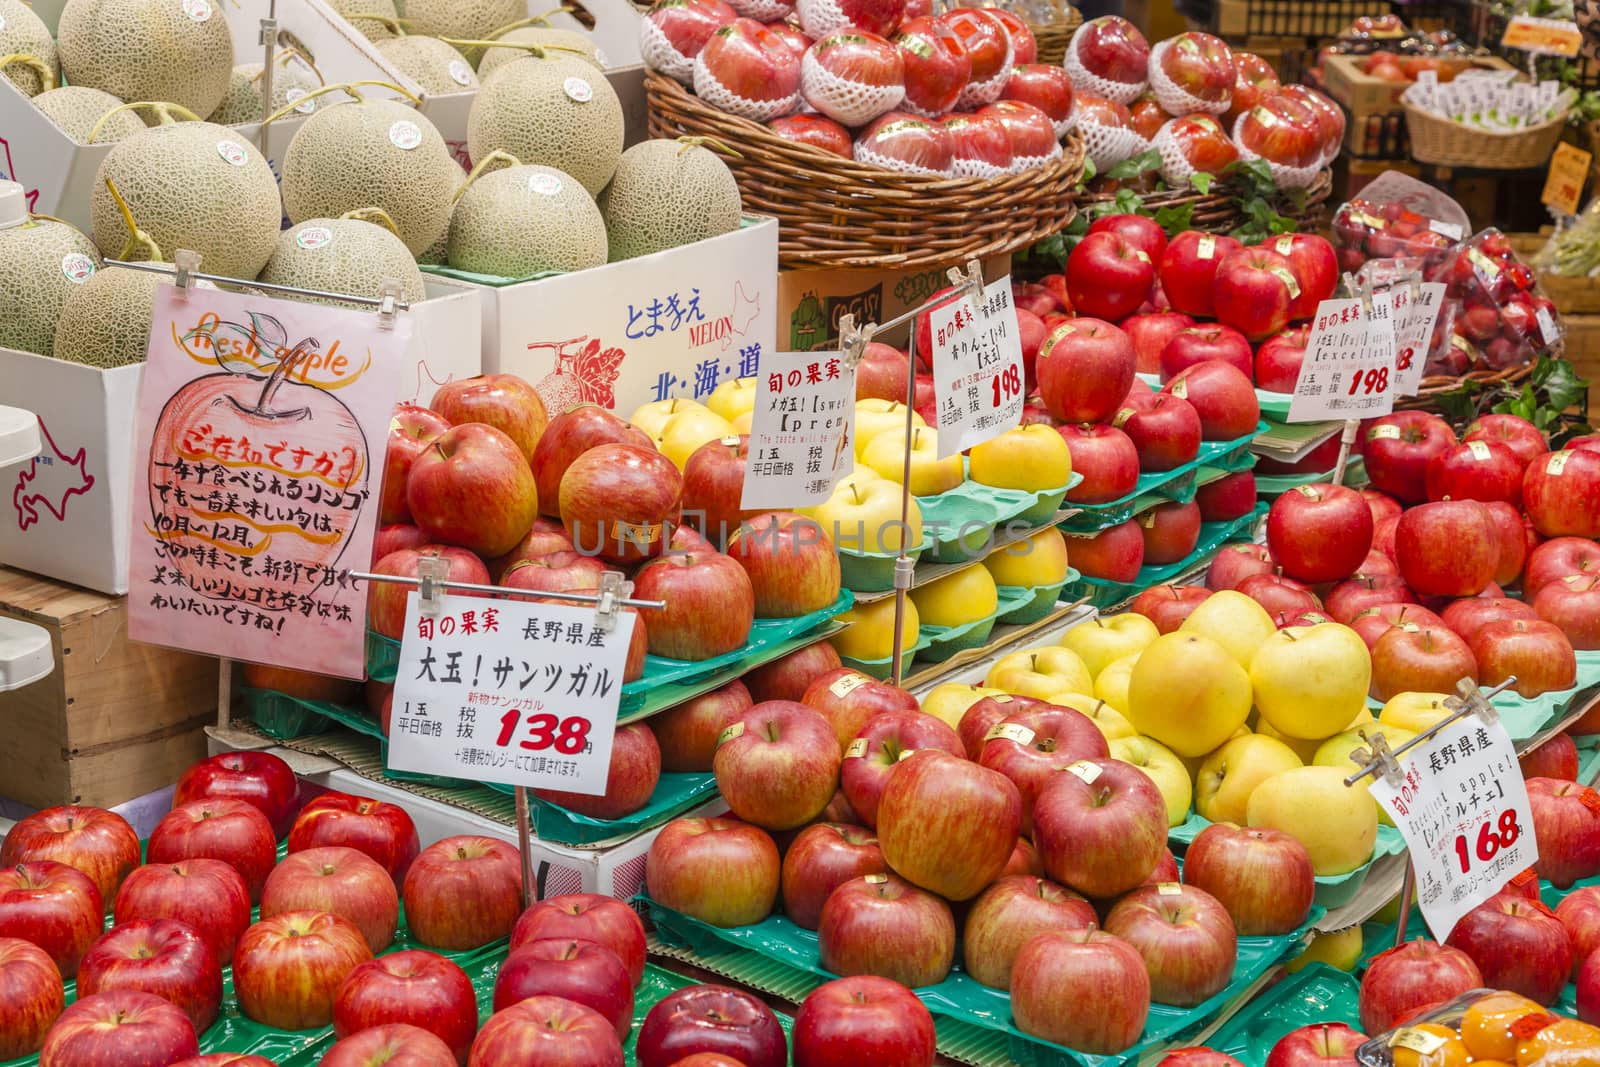 Osaka, Japan - October 26, 2014: Fresh fruits in a greengrocery in Kuromon Market in Osaka, Japan. The Kuromon Market has been called 'Osaka's Kitchen' since it opened as many cooks in Osaka come here to get the ingredients.